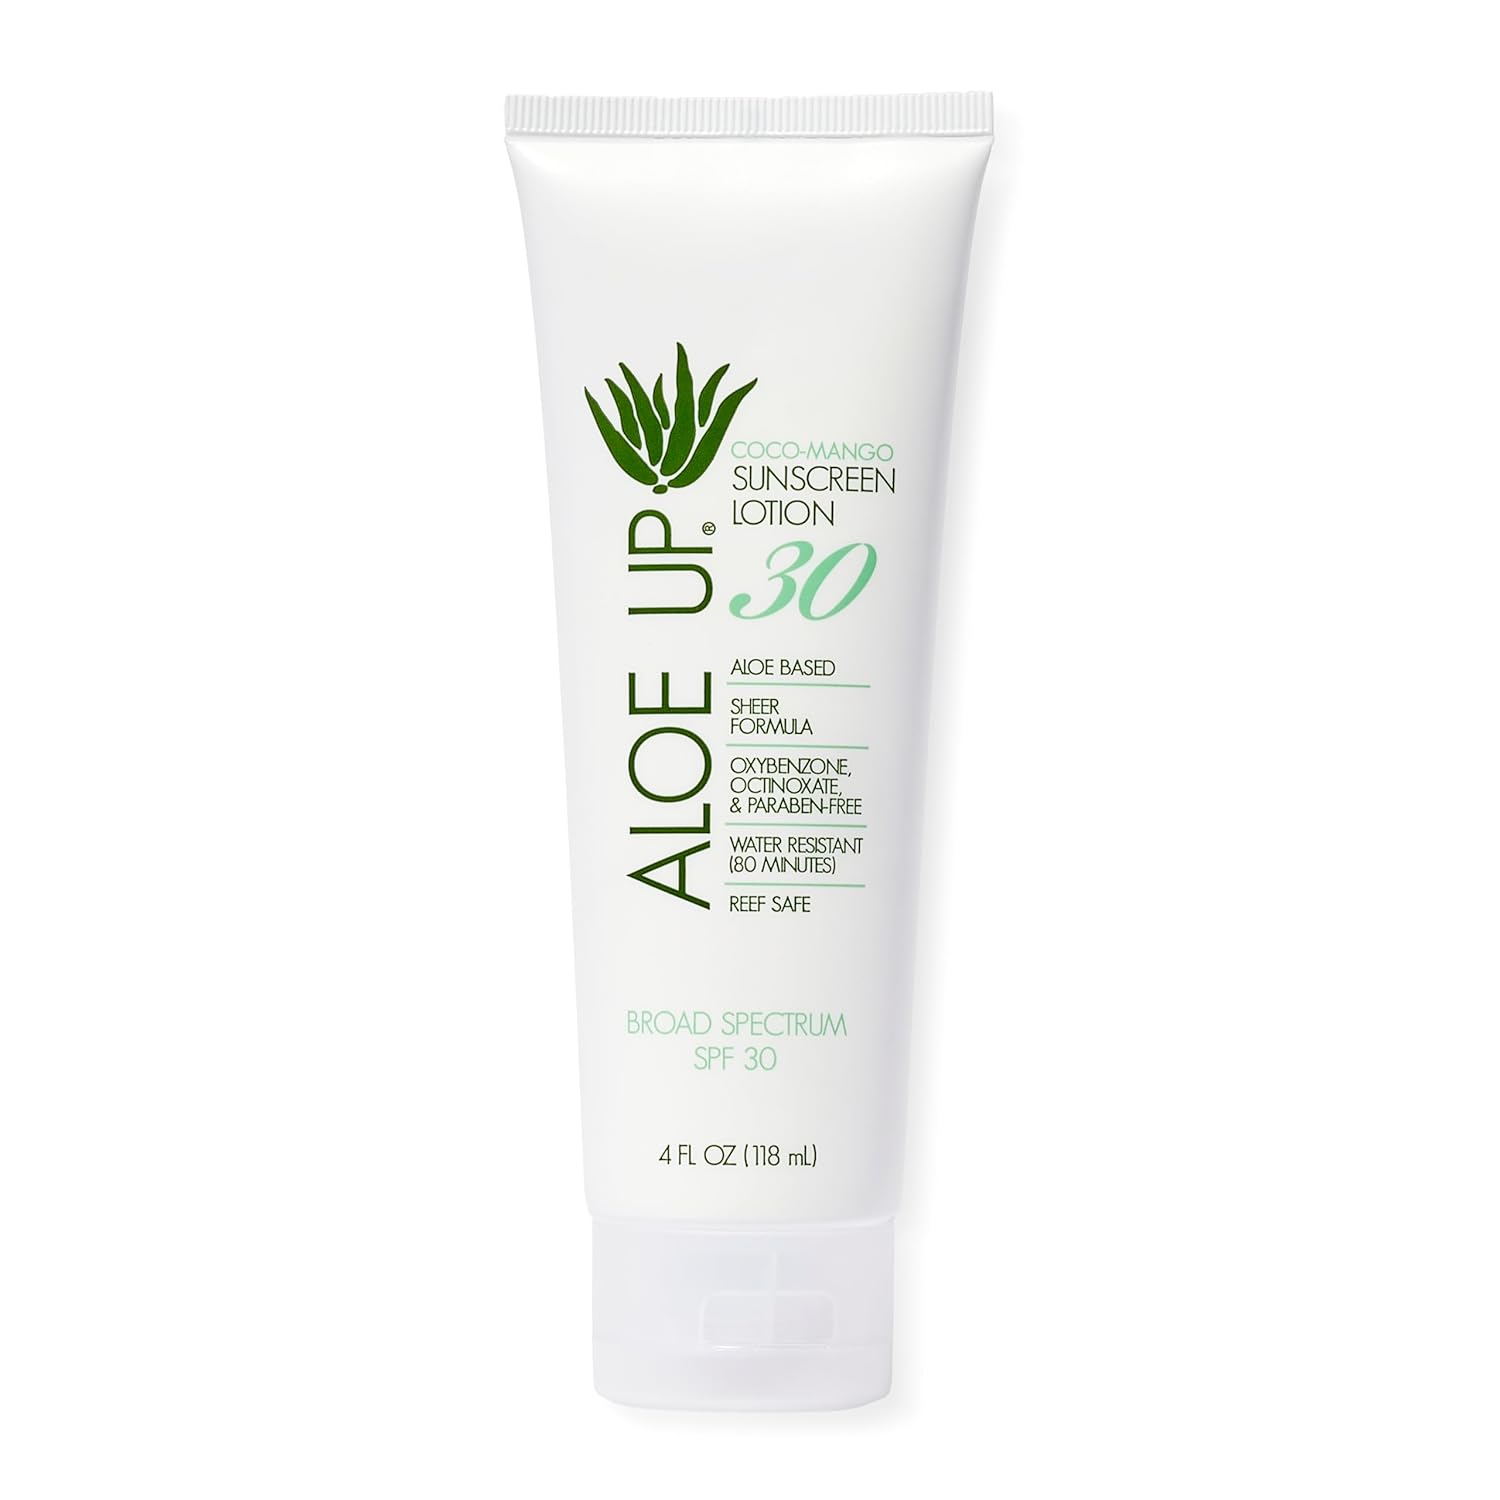 Aloe Up White Collection Sunscreen Lotion SPF 30 - Broad Spectrum UVA/UVB Sunscreen Protector for Face and Body - With Aloe Vera Gel - Alcohol-Free - Reef Friendly - Coco-Mango Fragrance - 4 Oz